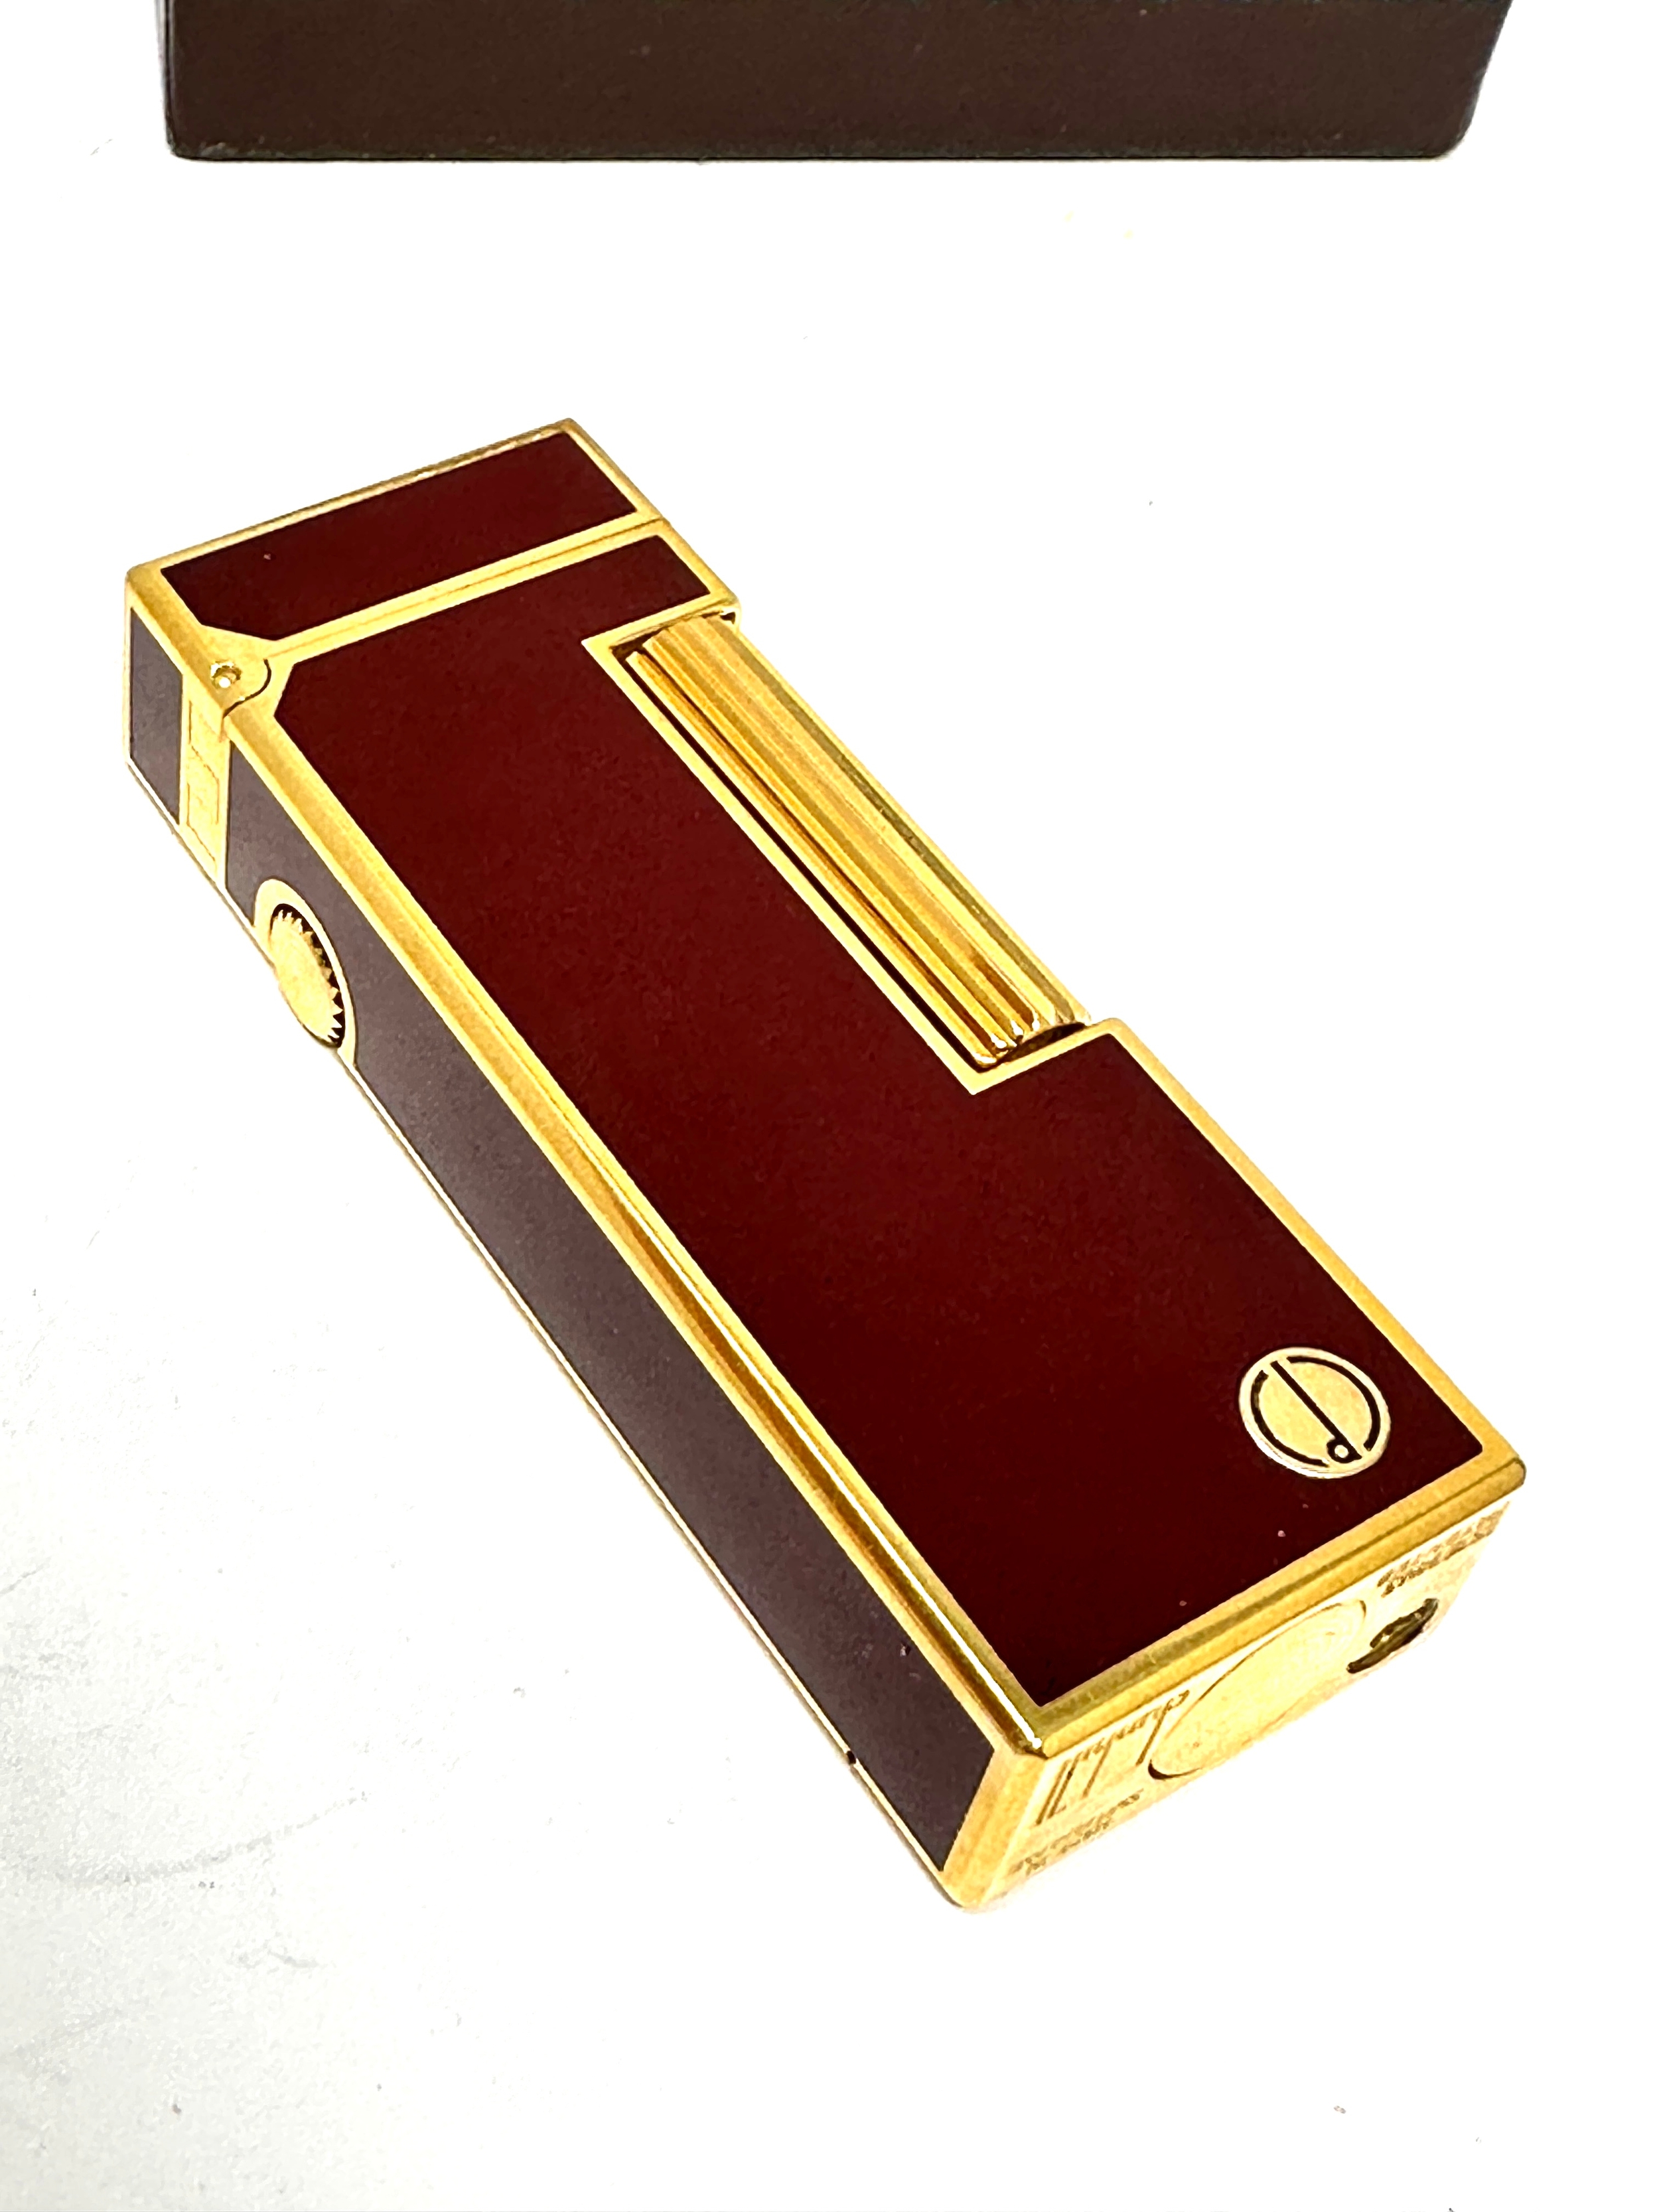 Boxed Dunhill Red Laquer Enamel Rollagas Lighter US.RE 24163 - Image 5 of 9